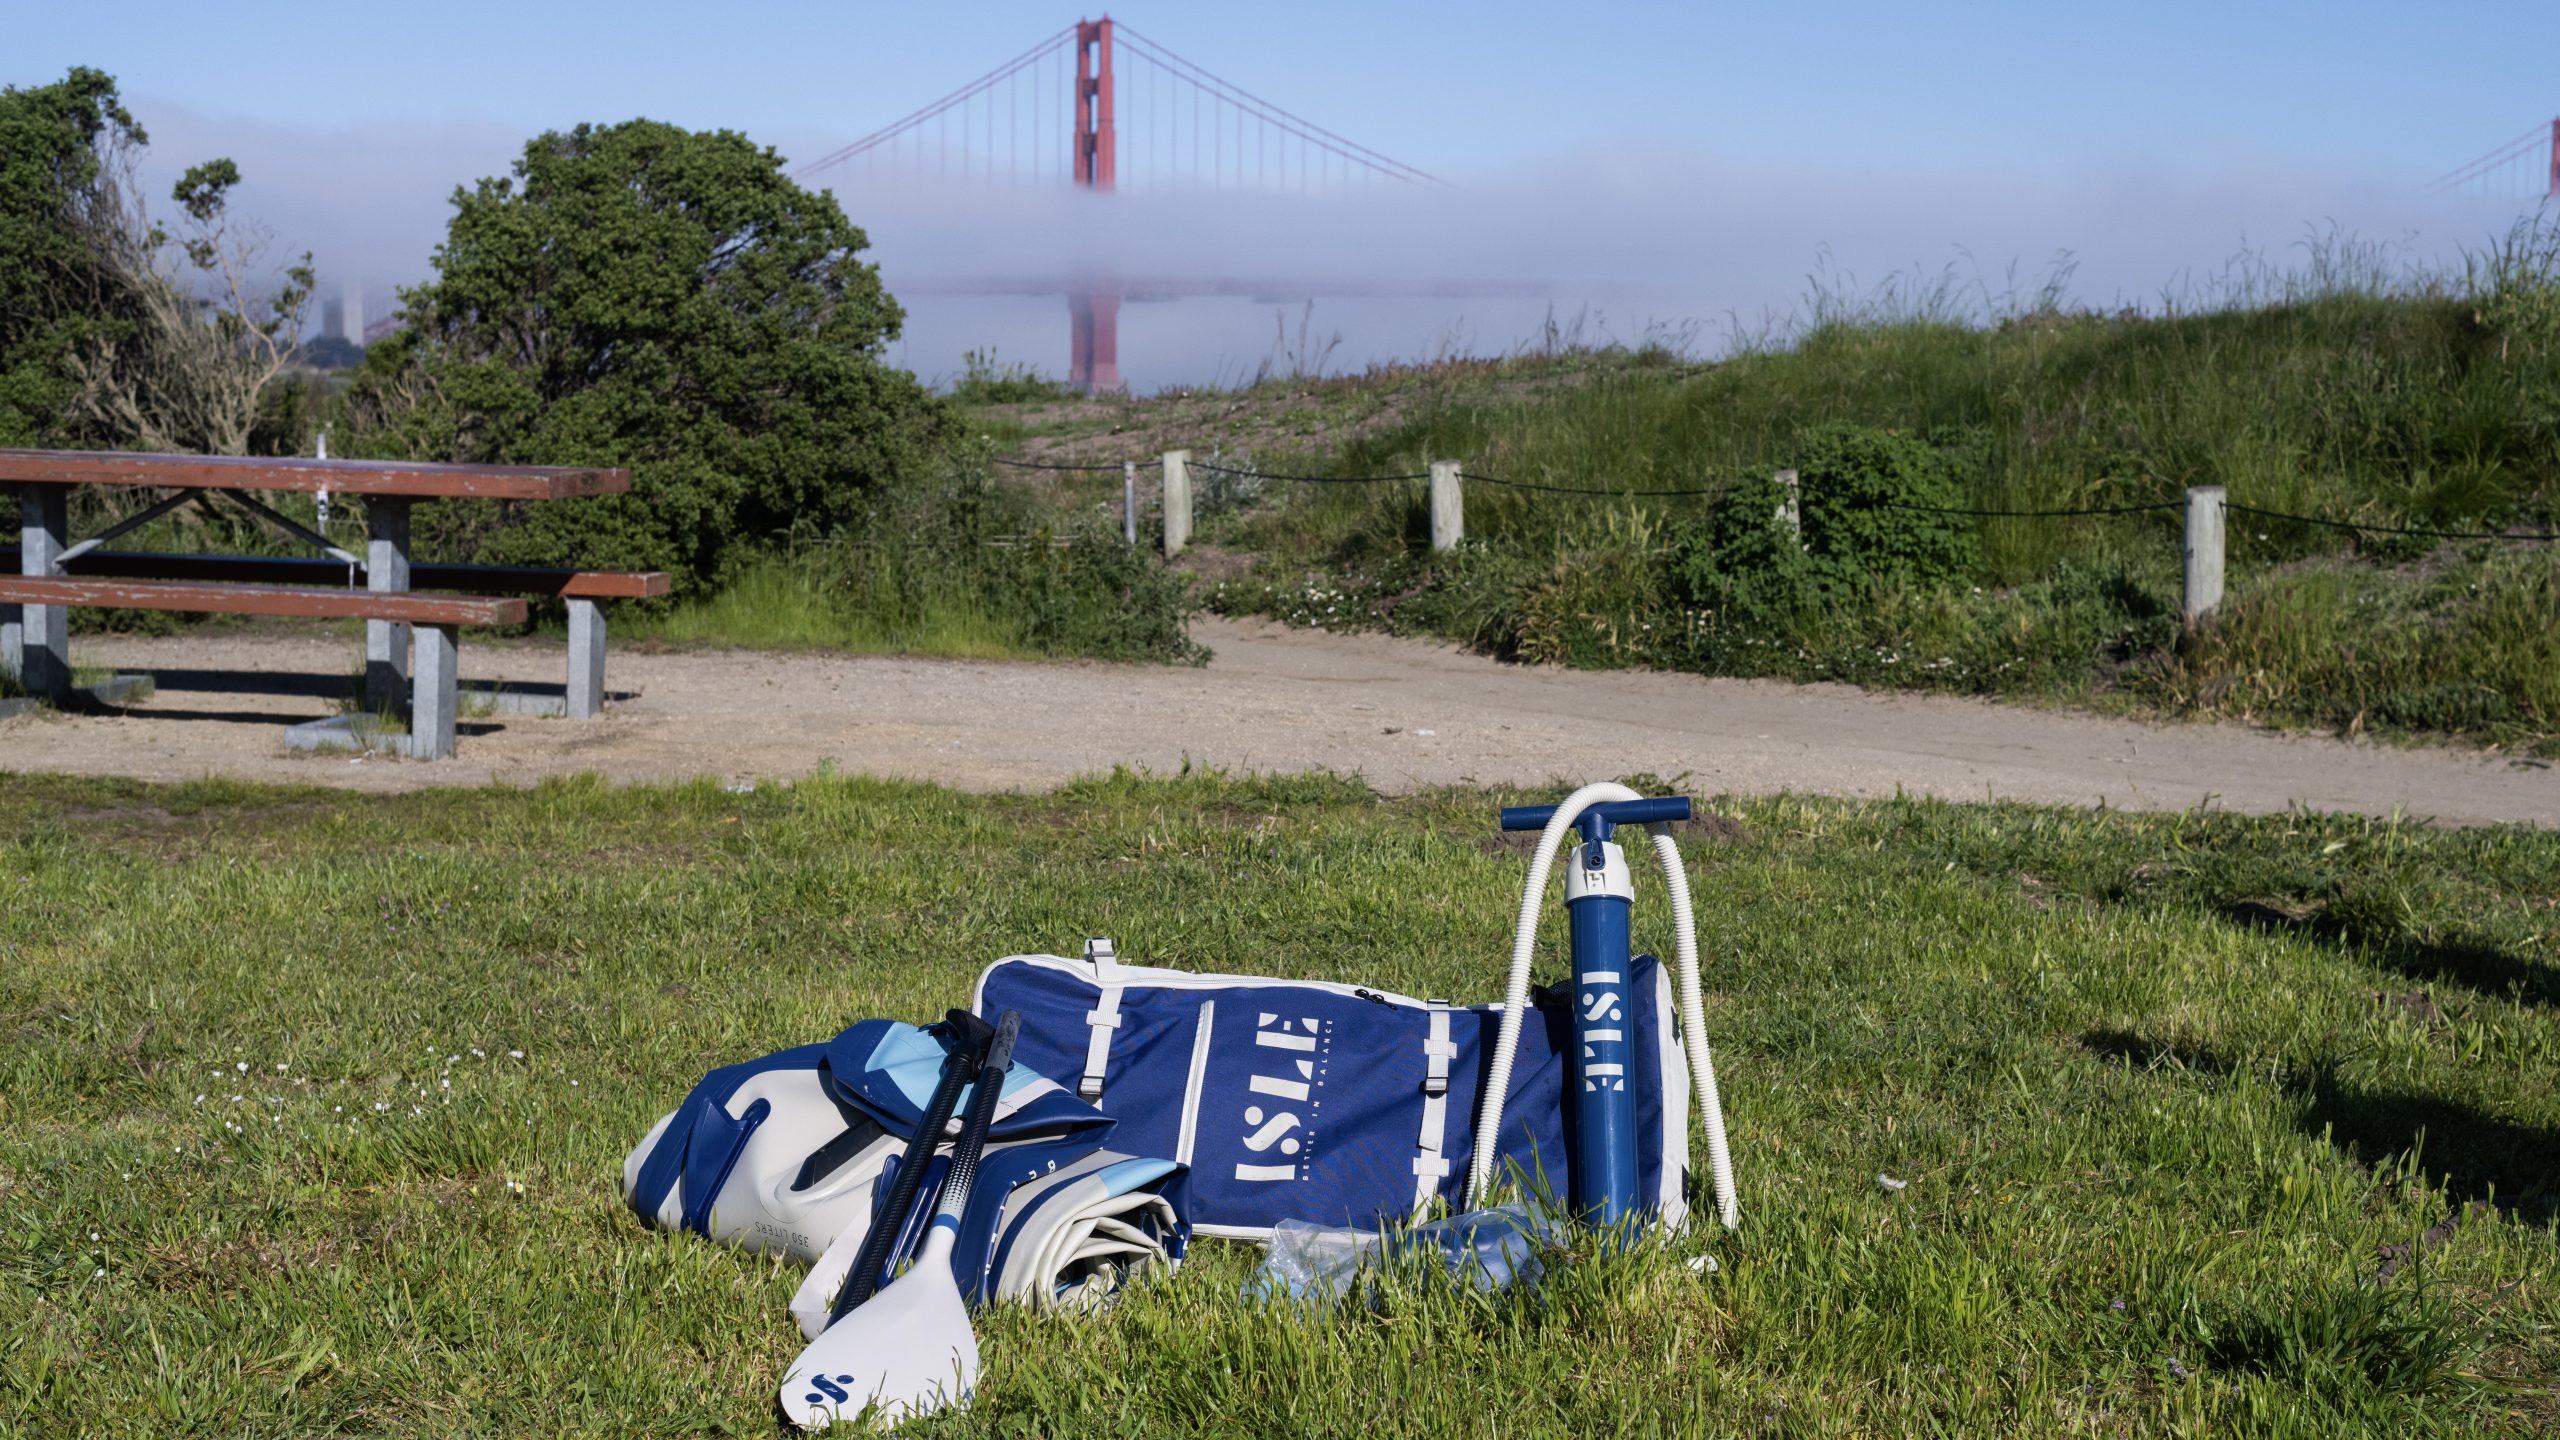 isle explorer inflatable paddle board and accessories on grass with golden gate bridge in background